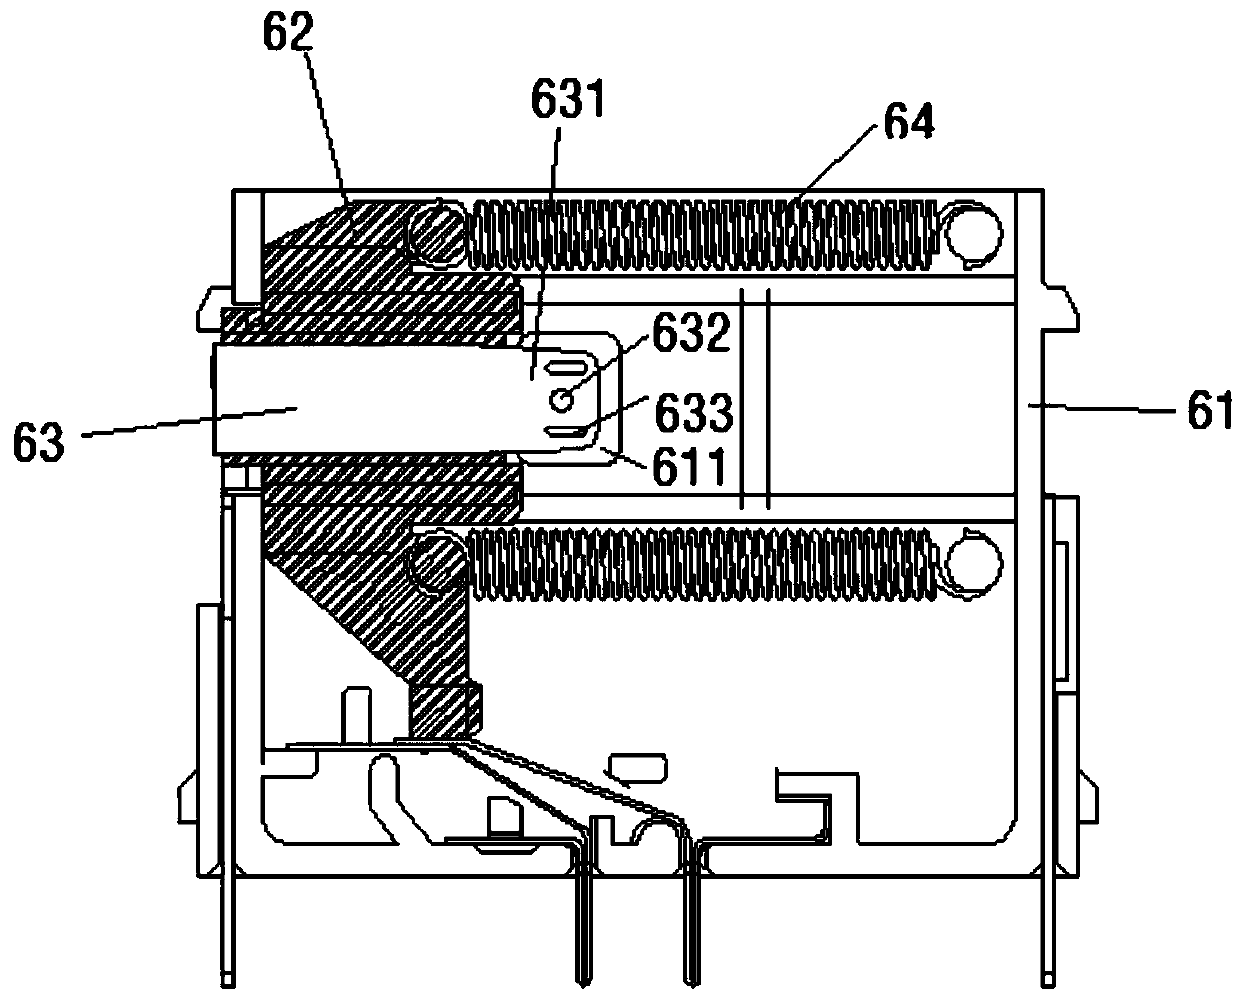 Welding method and system for electrode plate of surge protector